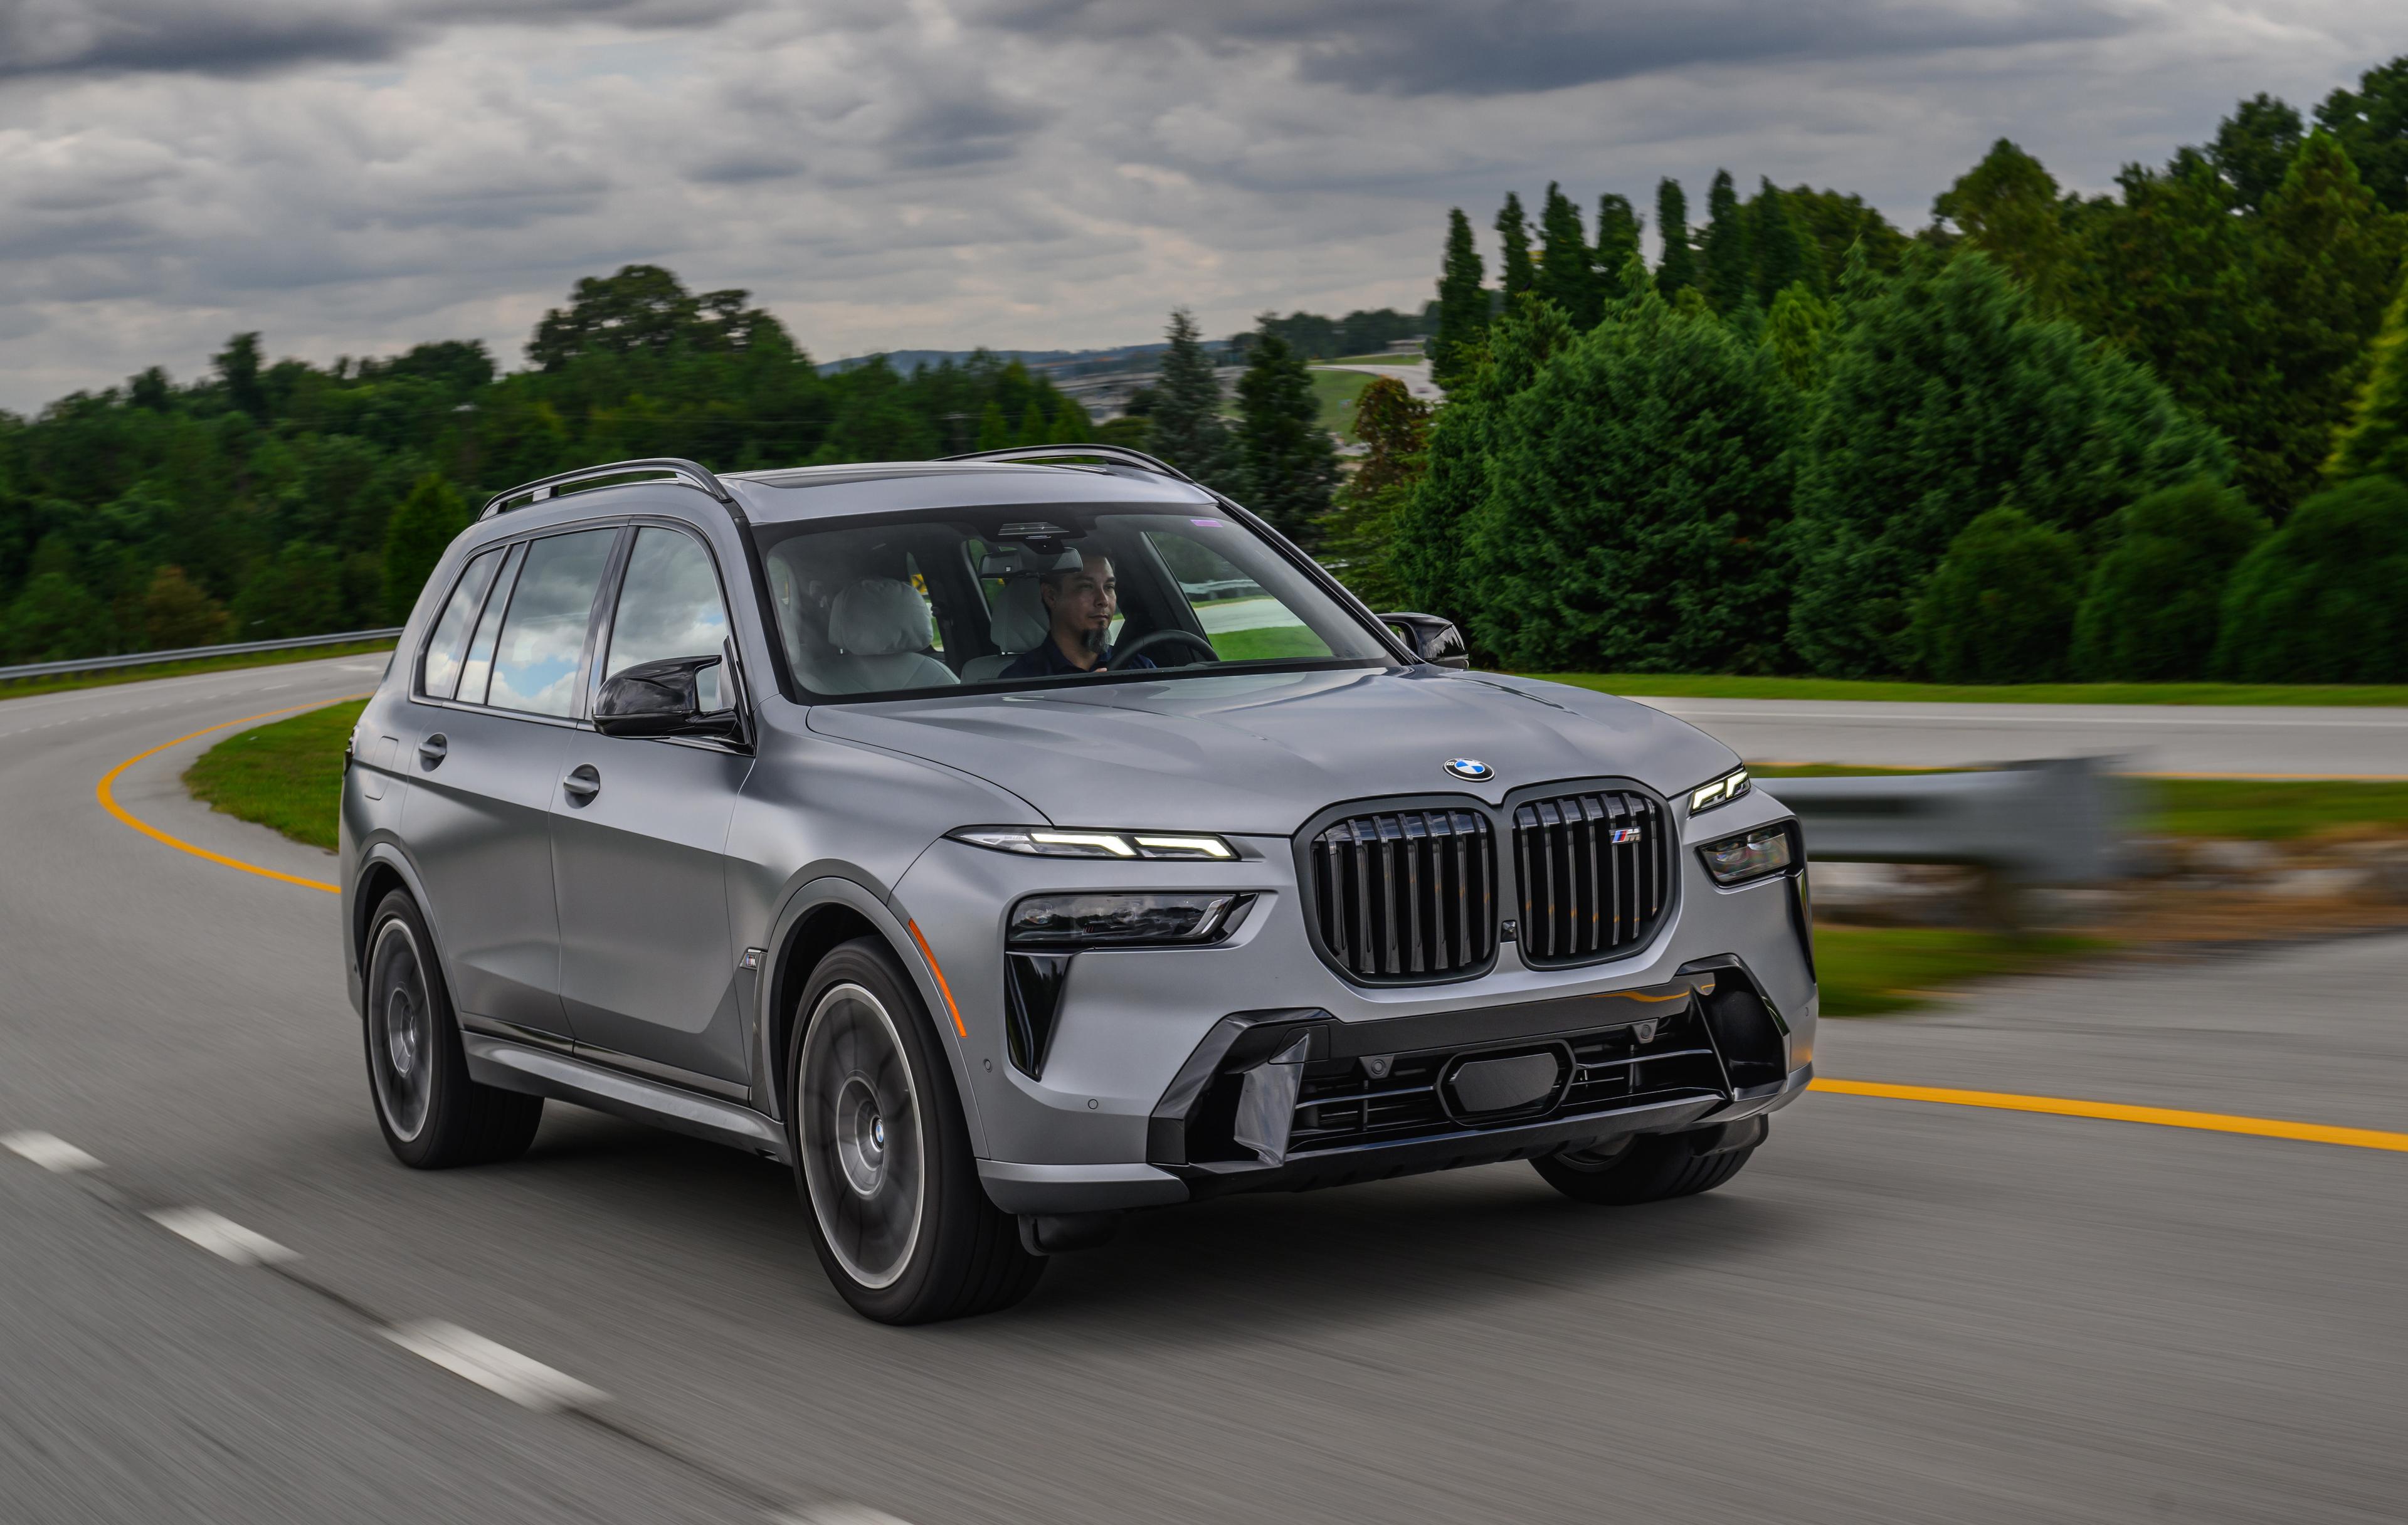 Grey BMW X7 driving on road